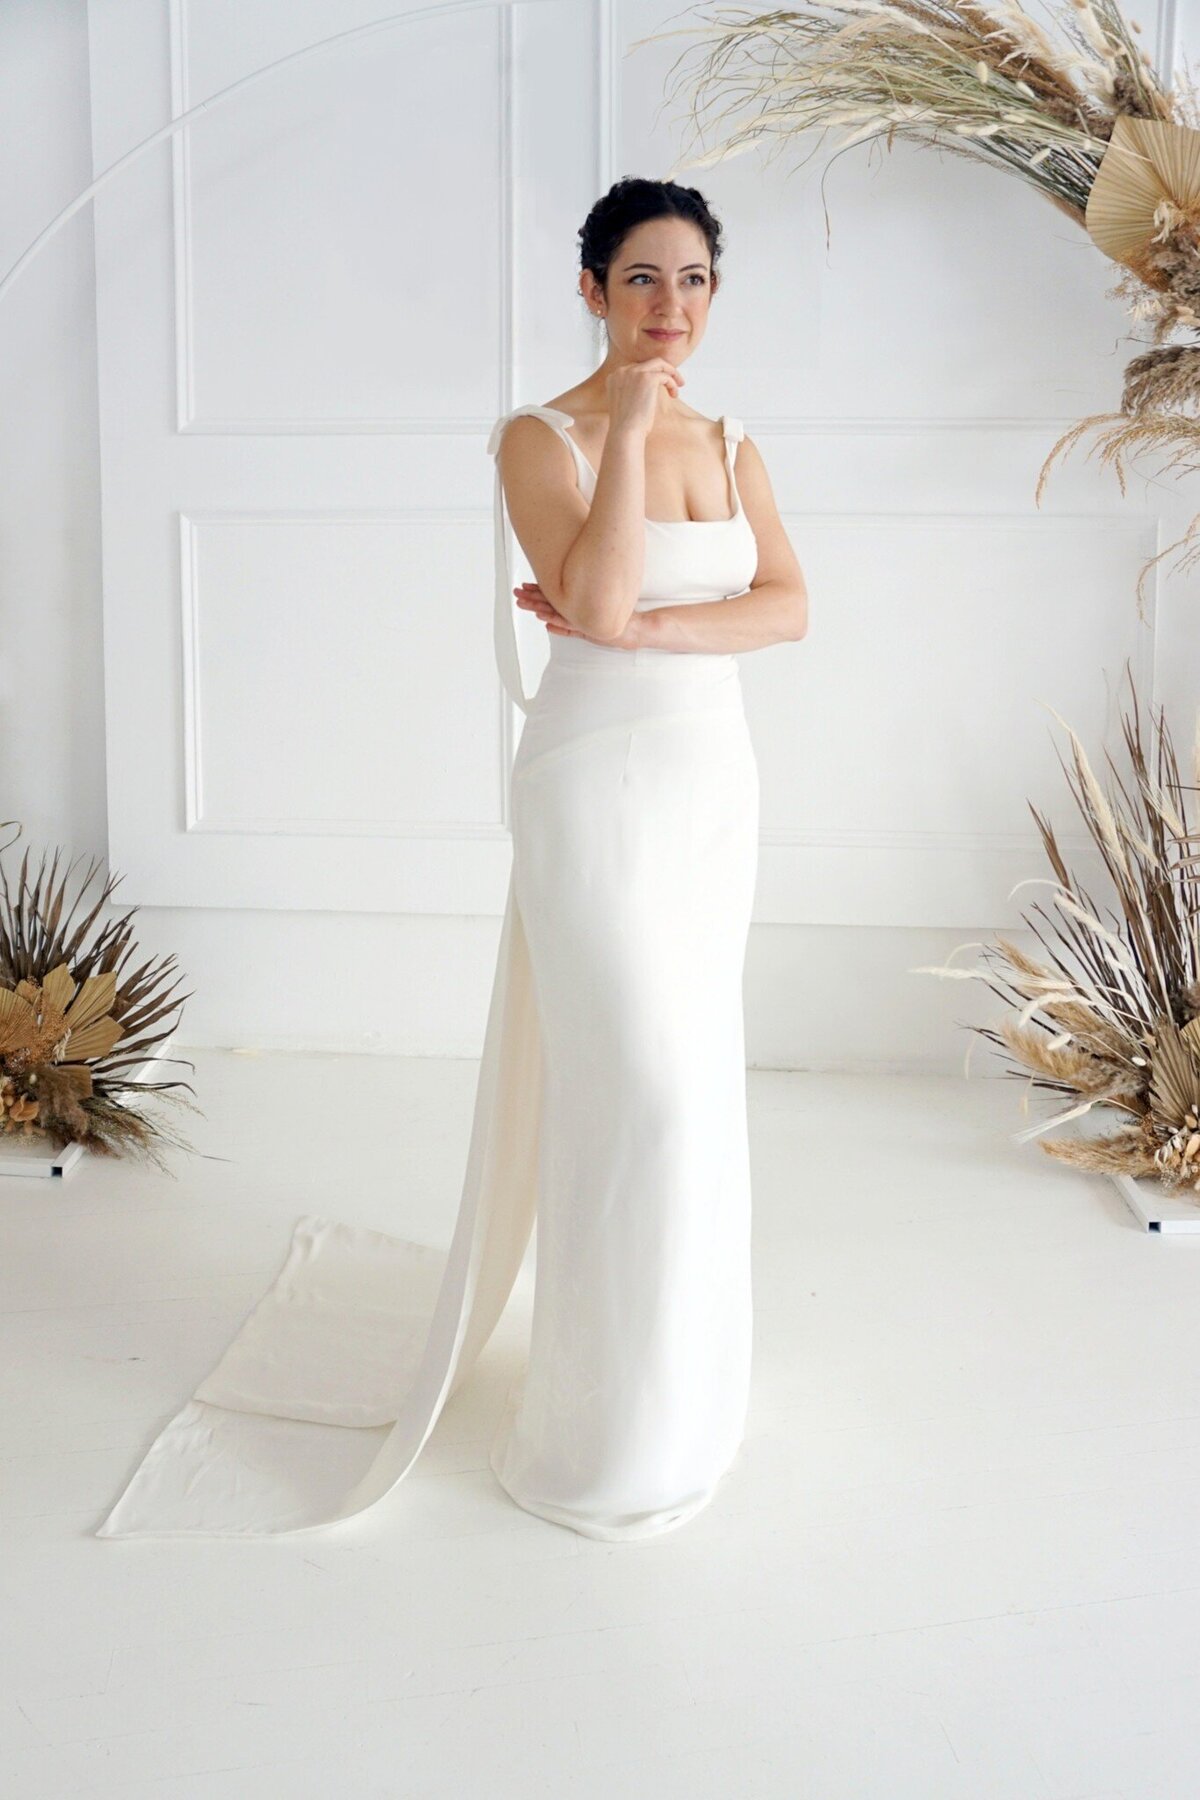 Model posed in a three-quarter turn wearing the Jealine style. The wedding dress features a tank-style bodice and column skirt.